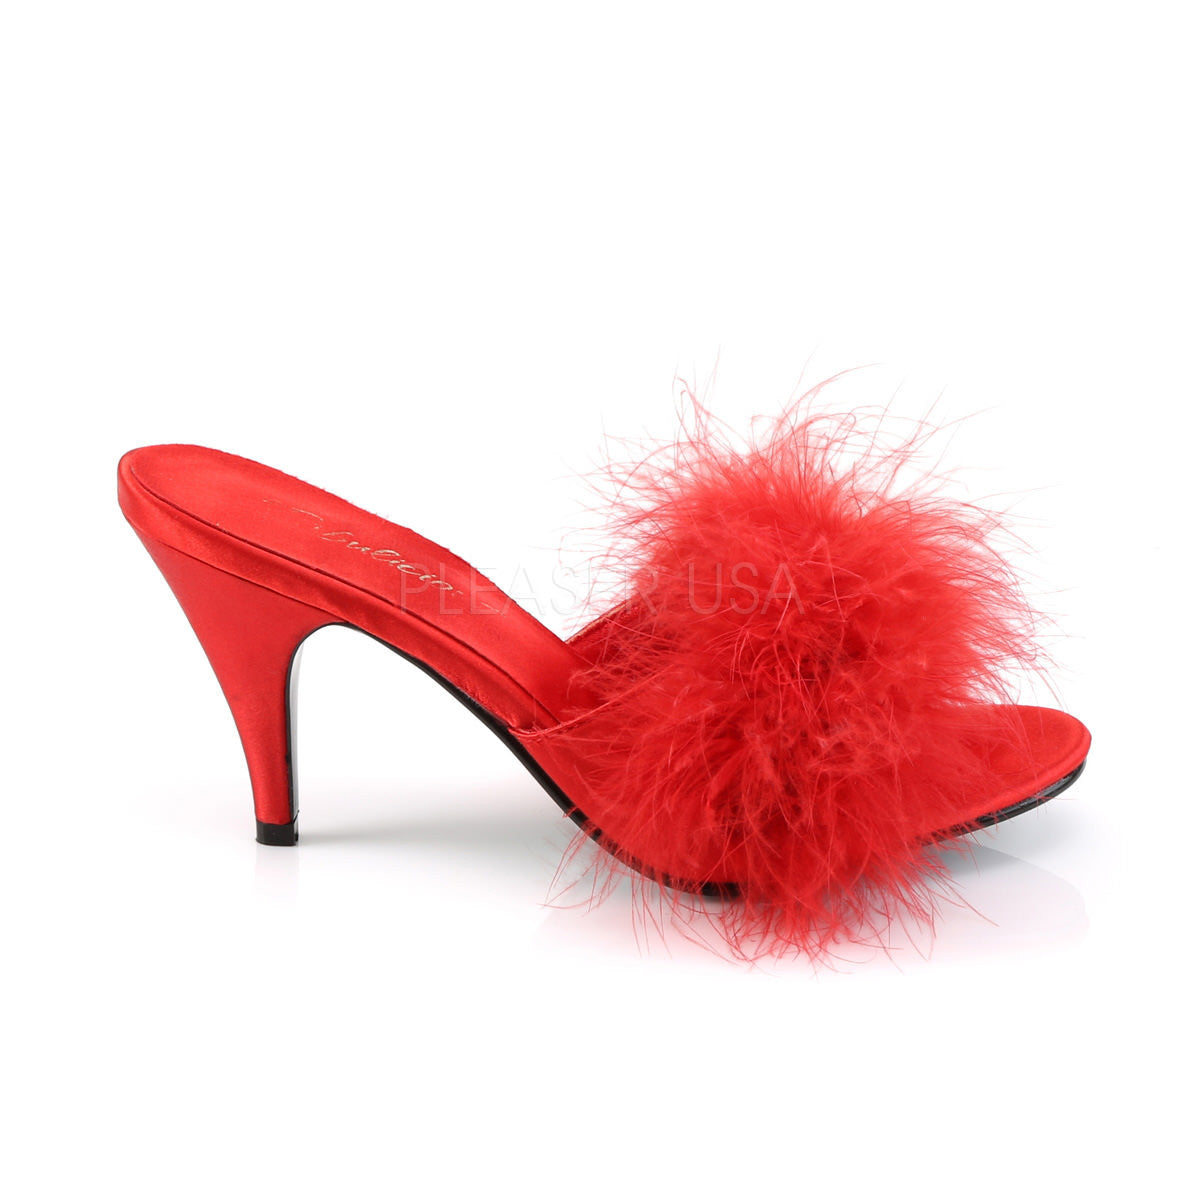 FABULICIOUS AMOUR-03 Red Satin-Fur Classic Slippers - Shoecup.com - 5